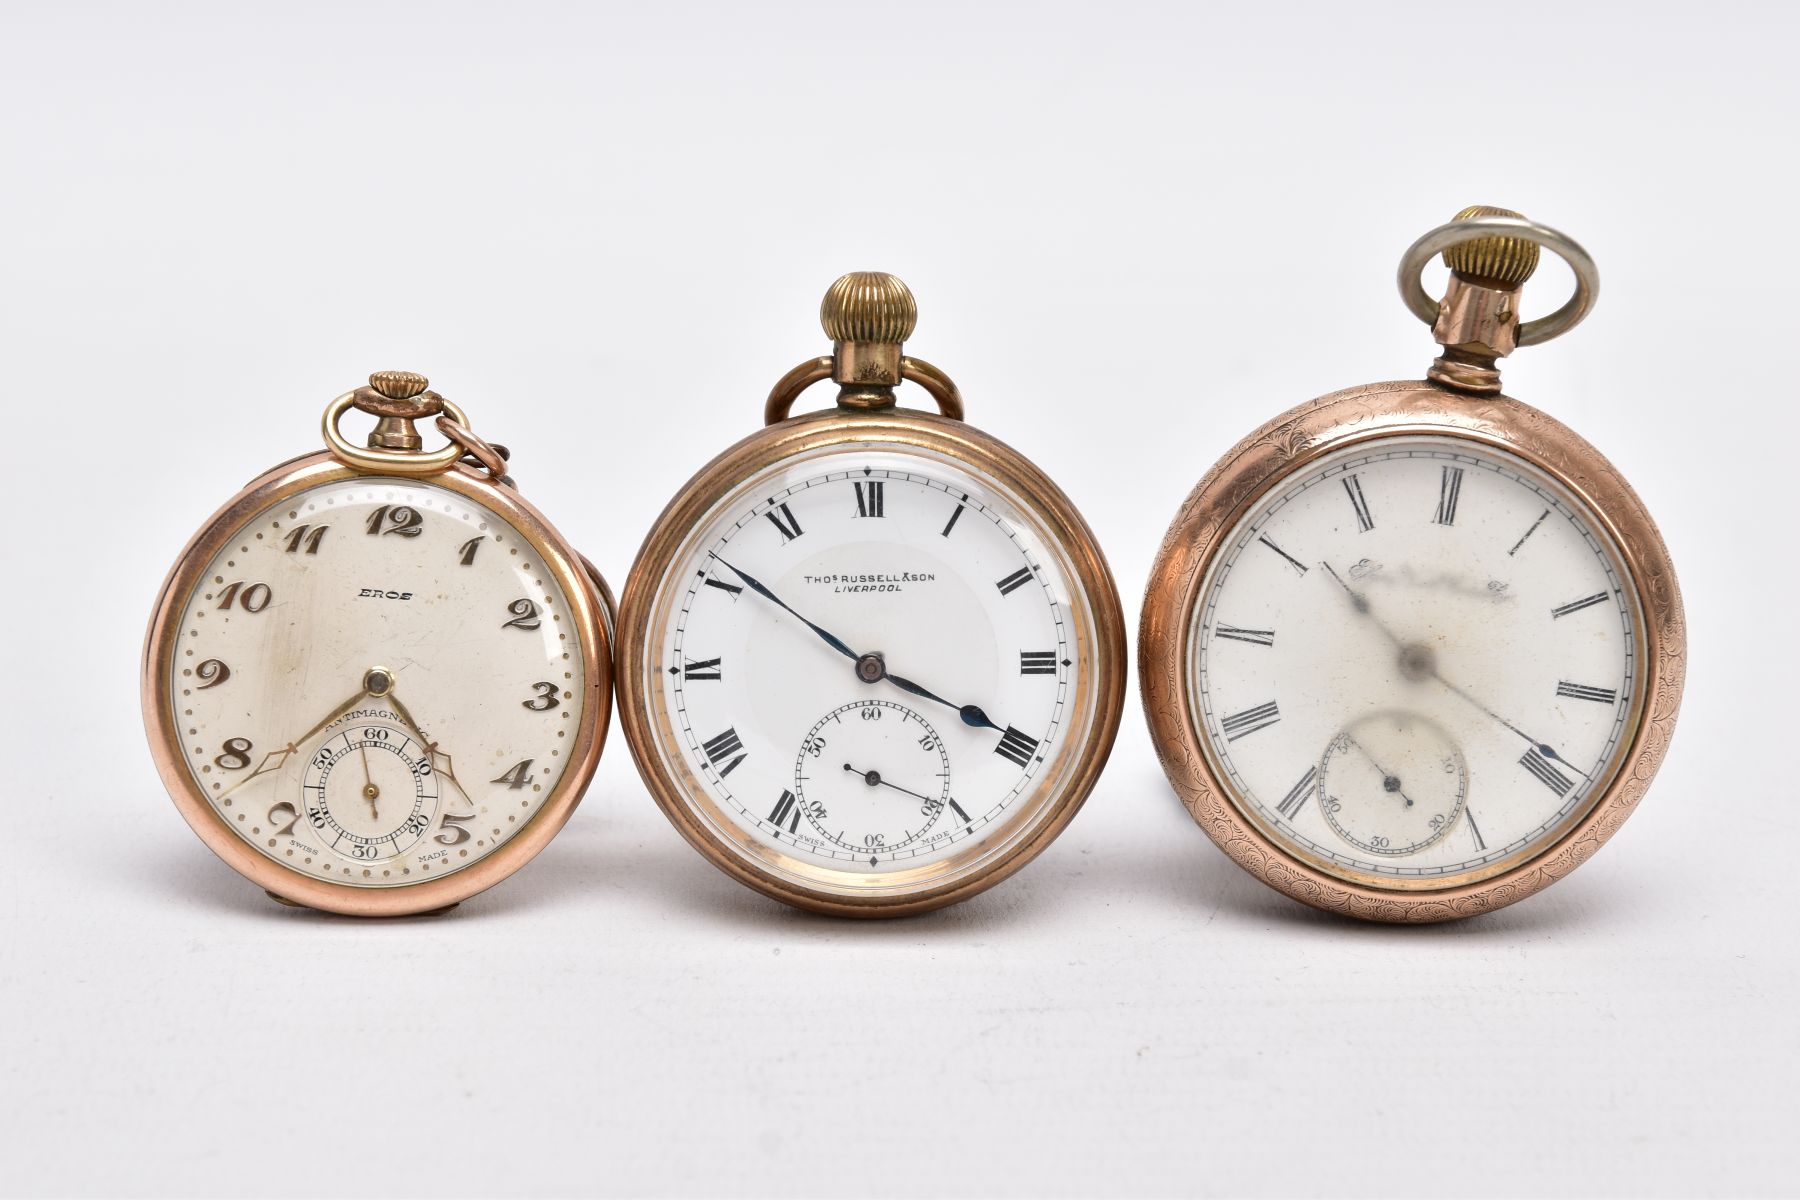 THREE GOLD PLATED OPEN FACED POCKET WATCHES, the first with a white dial signed 'Eros', Arabic